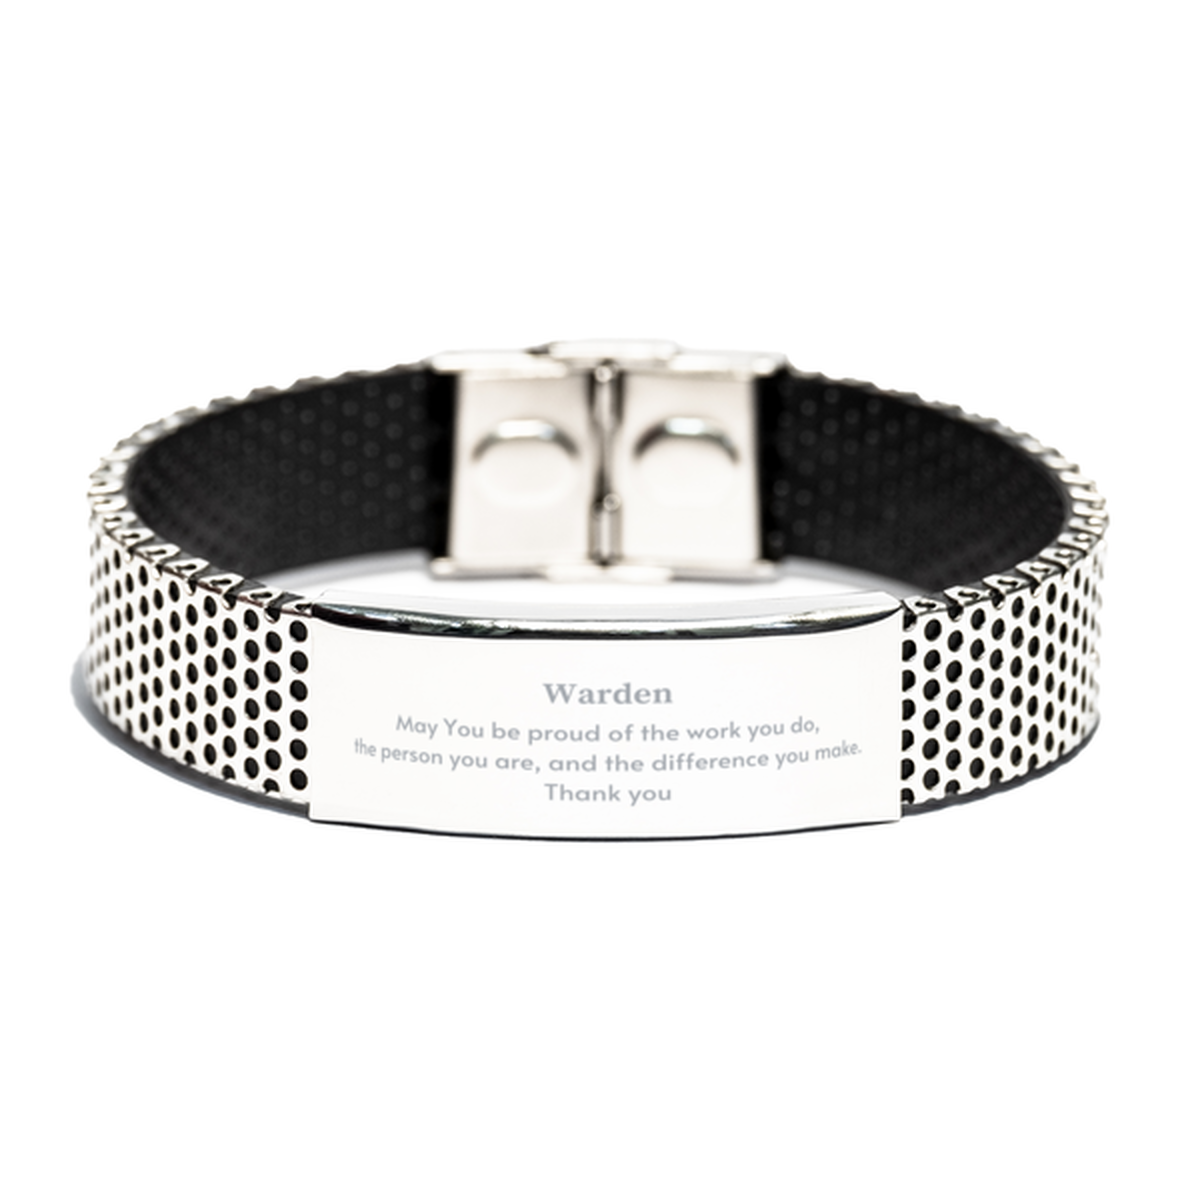 Heartwarming Stainless Steel Bracelet Retirement Coworkers Gifts for Warden, Warden May You be proud of the work you do, the person you are Gifts for Boss Men Women Friends